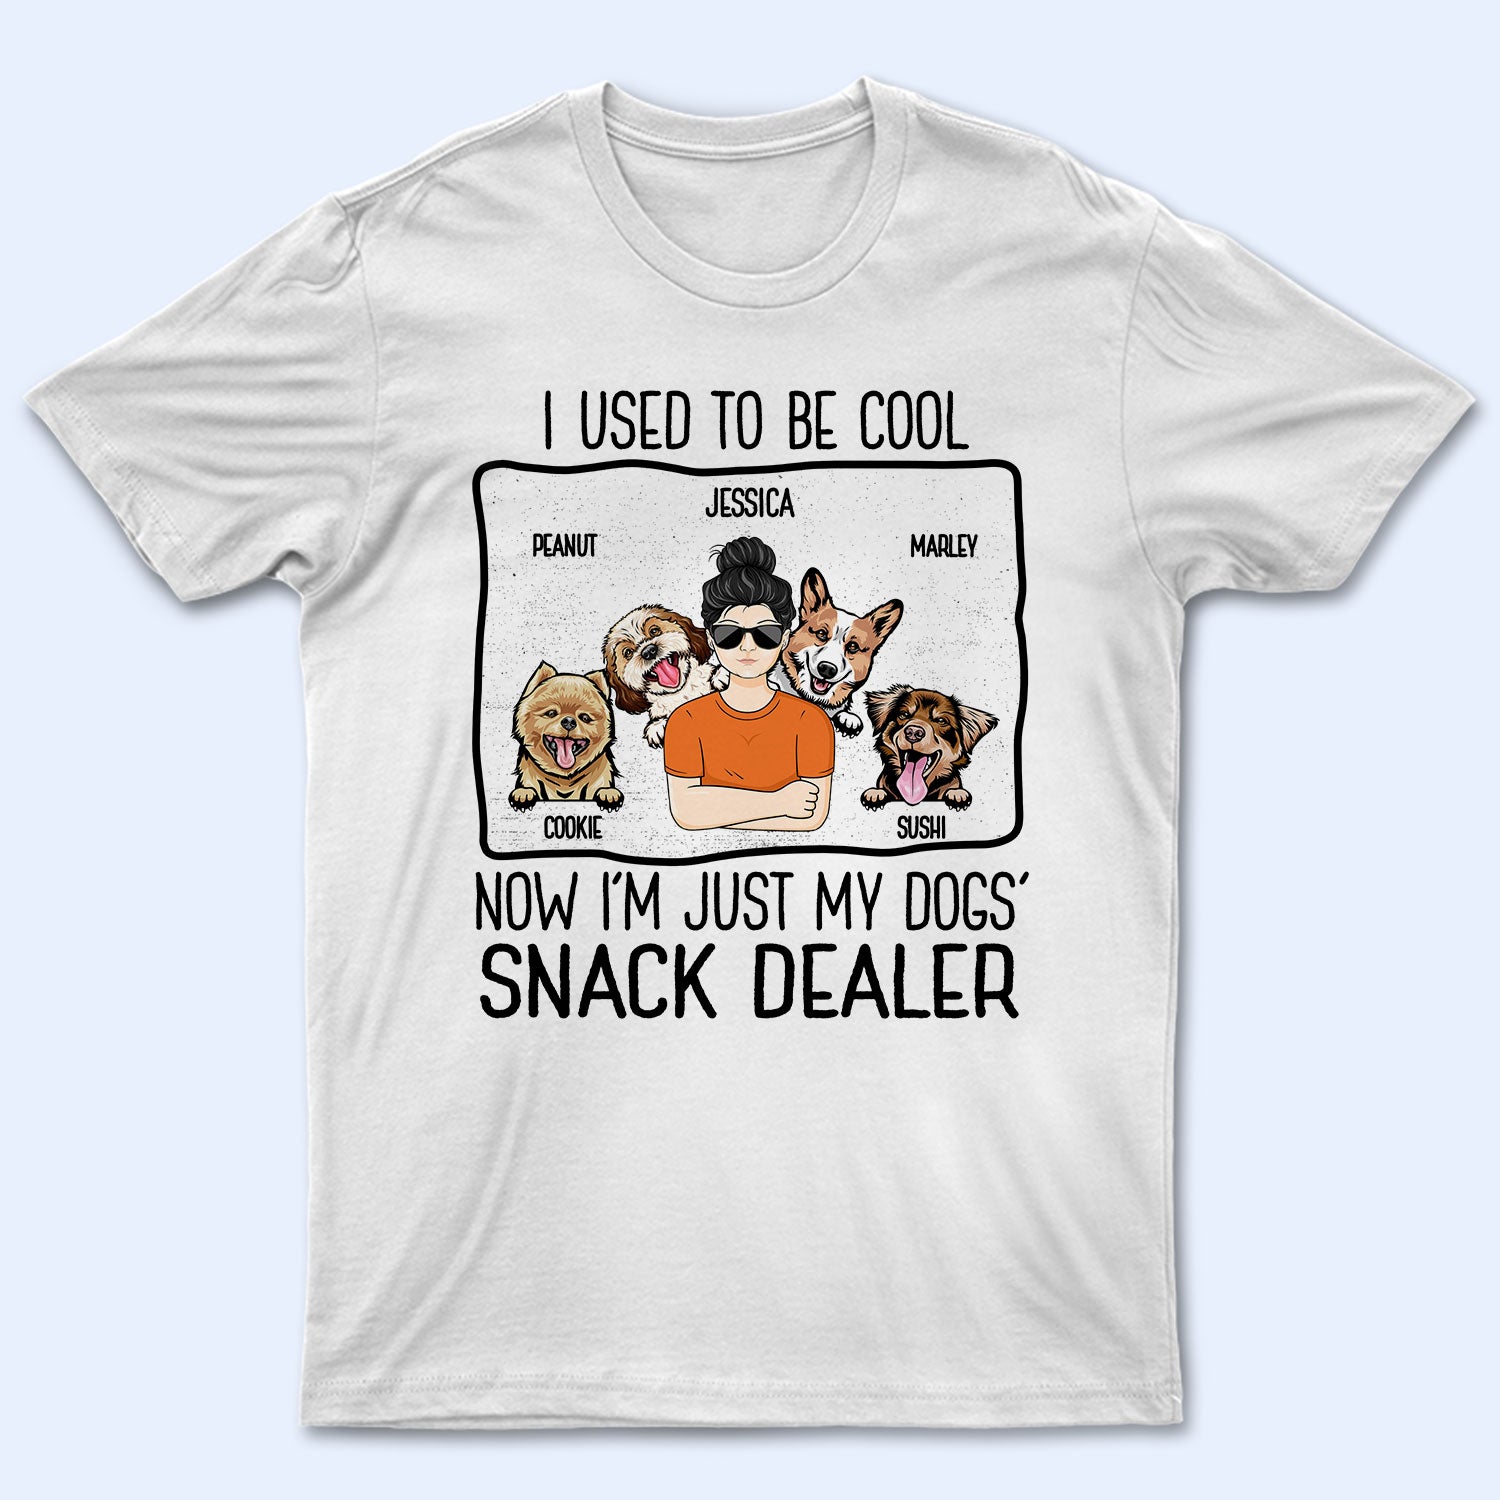 Now I'm Just My Dogs' Snack Dealer - Gift For Dog Lovers, Dog Mom, Dog Dad - Personalized T Shirt